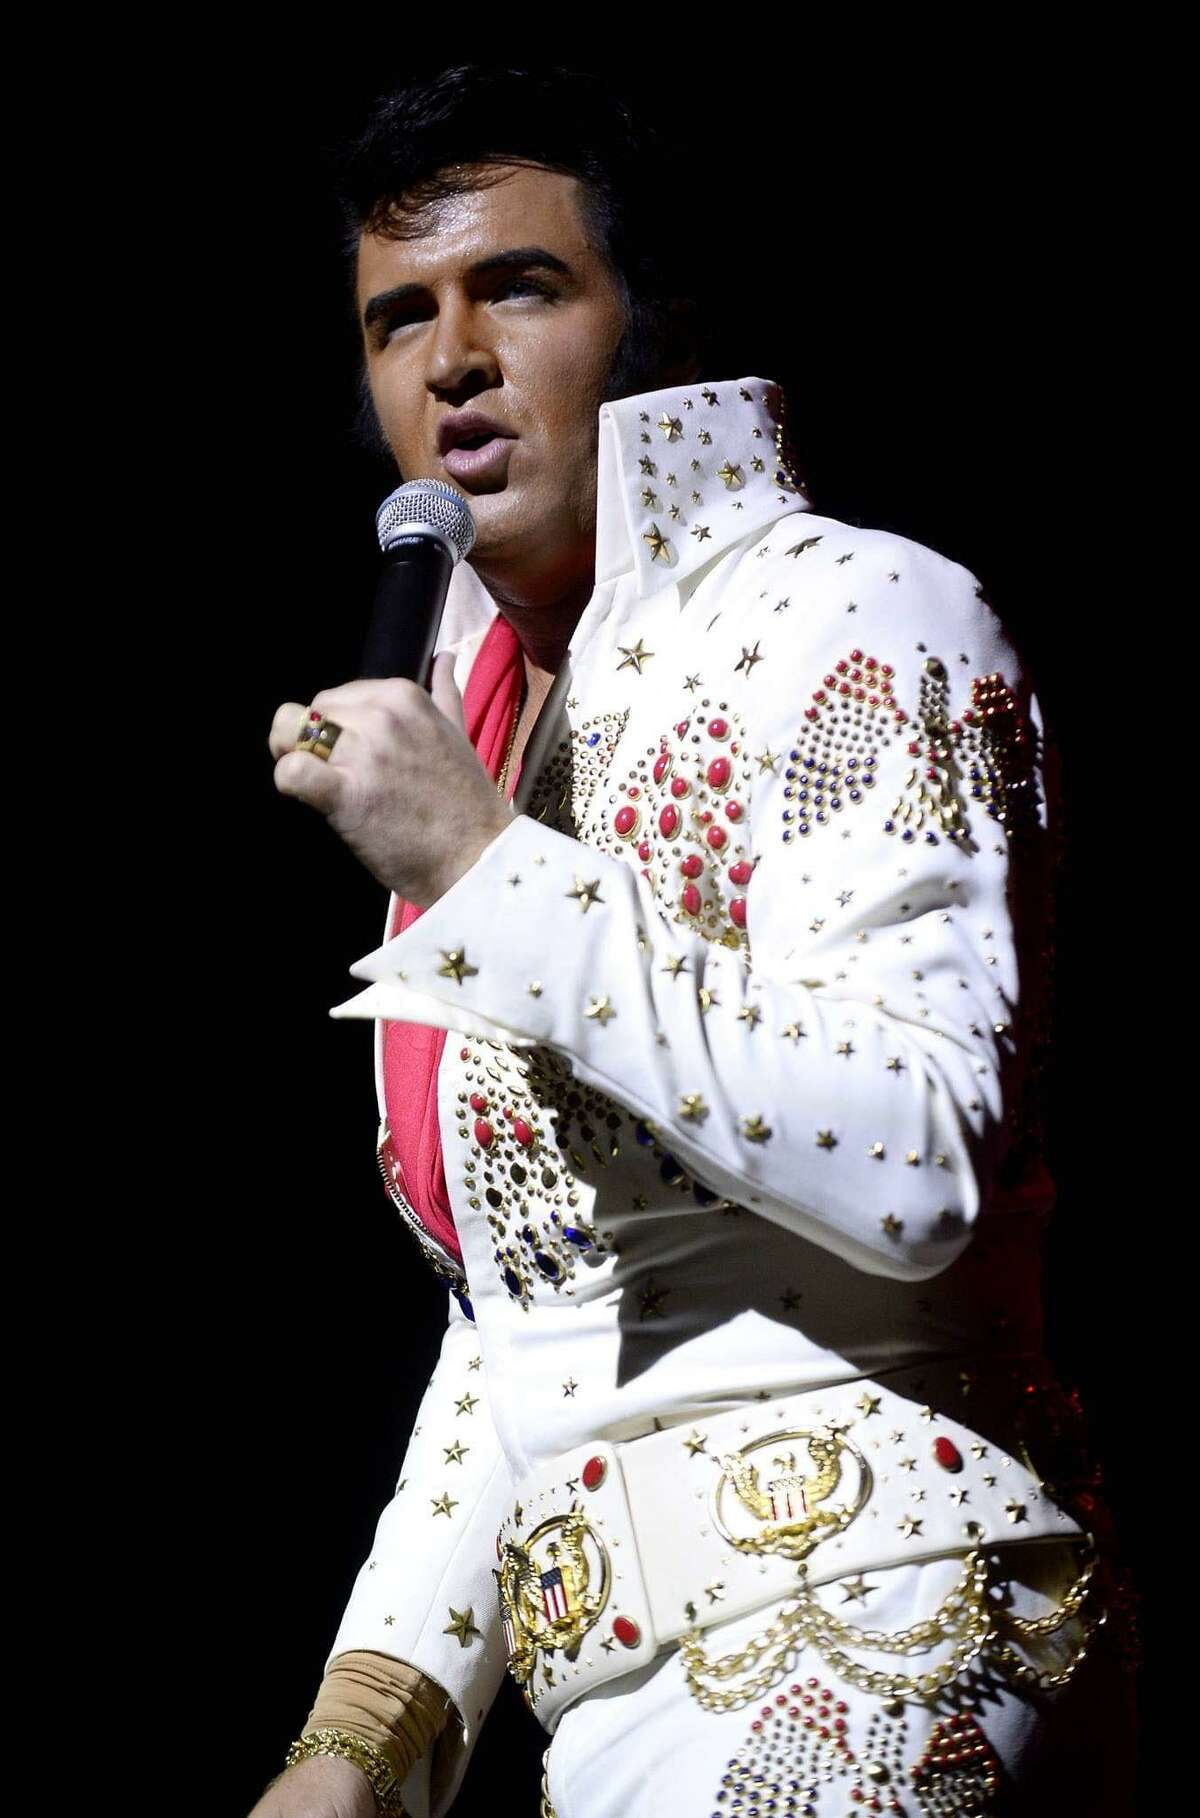 Elvis tribute artist Travis Powell is coming to Huntsville’s Old Town Theater Nov. 6 at 4 p.m.